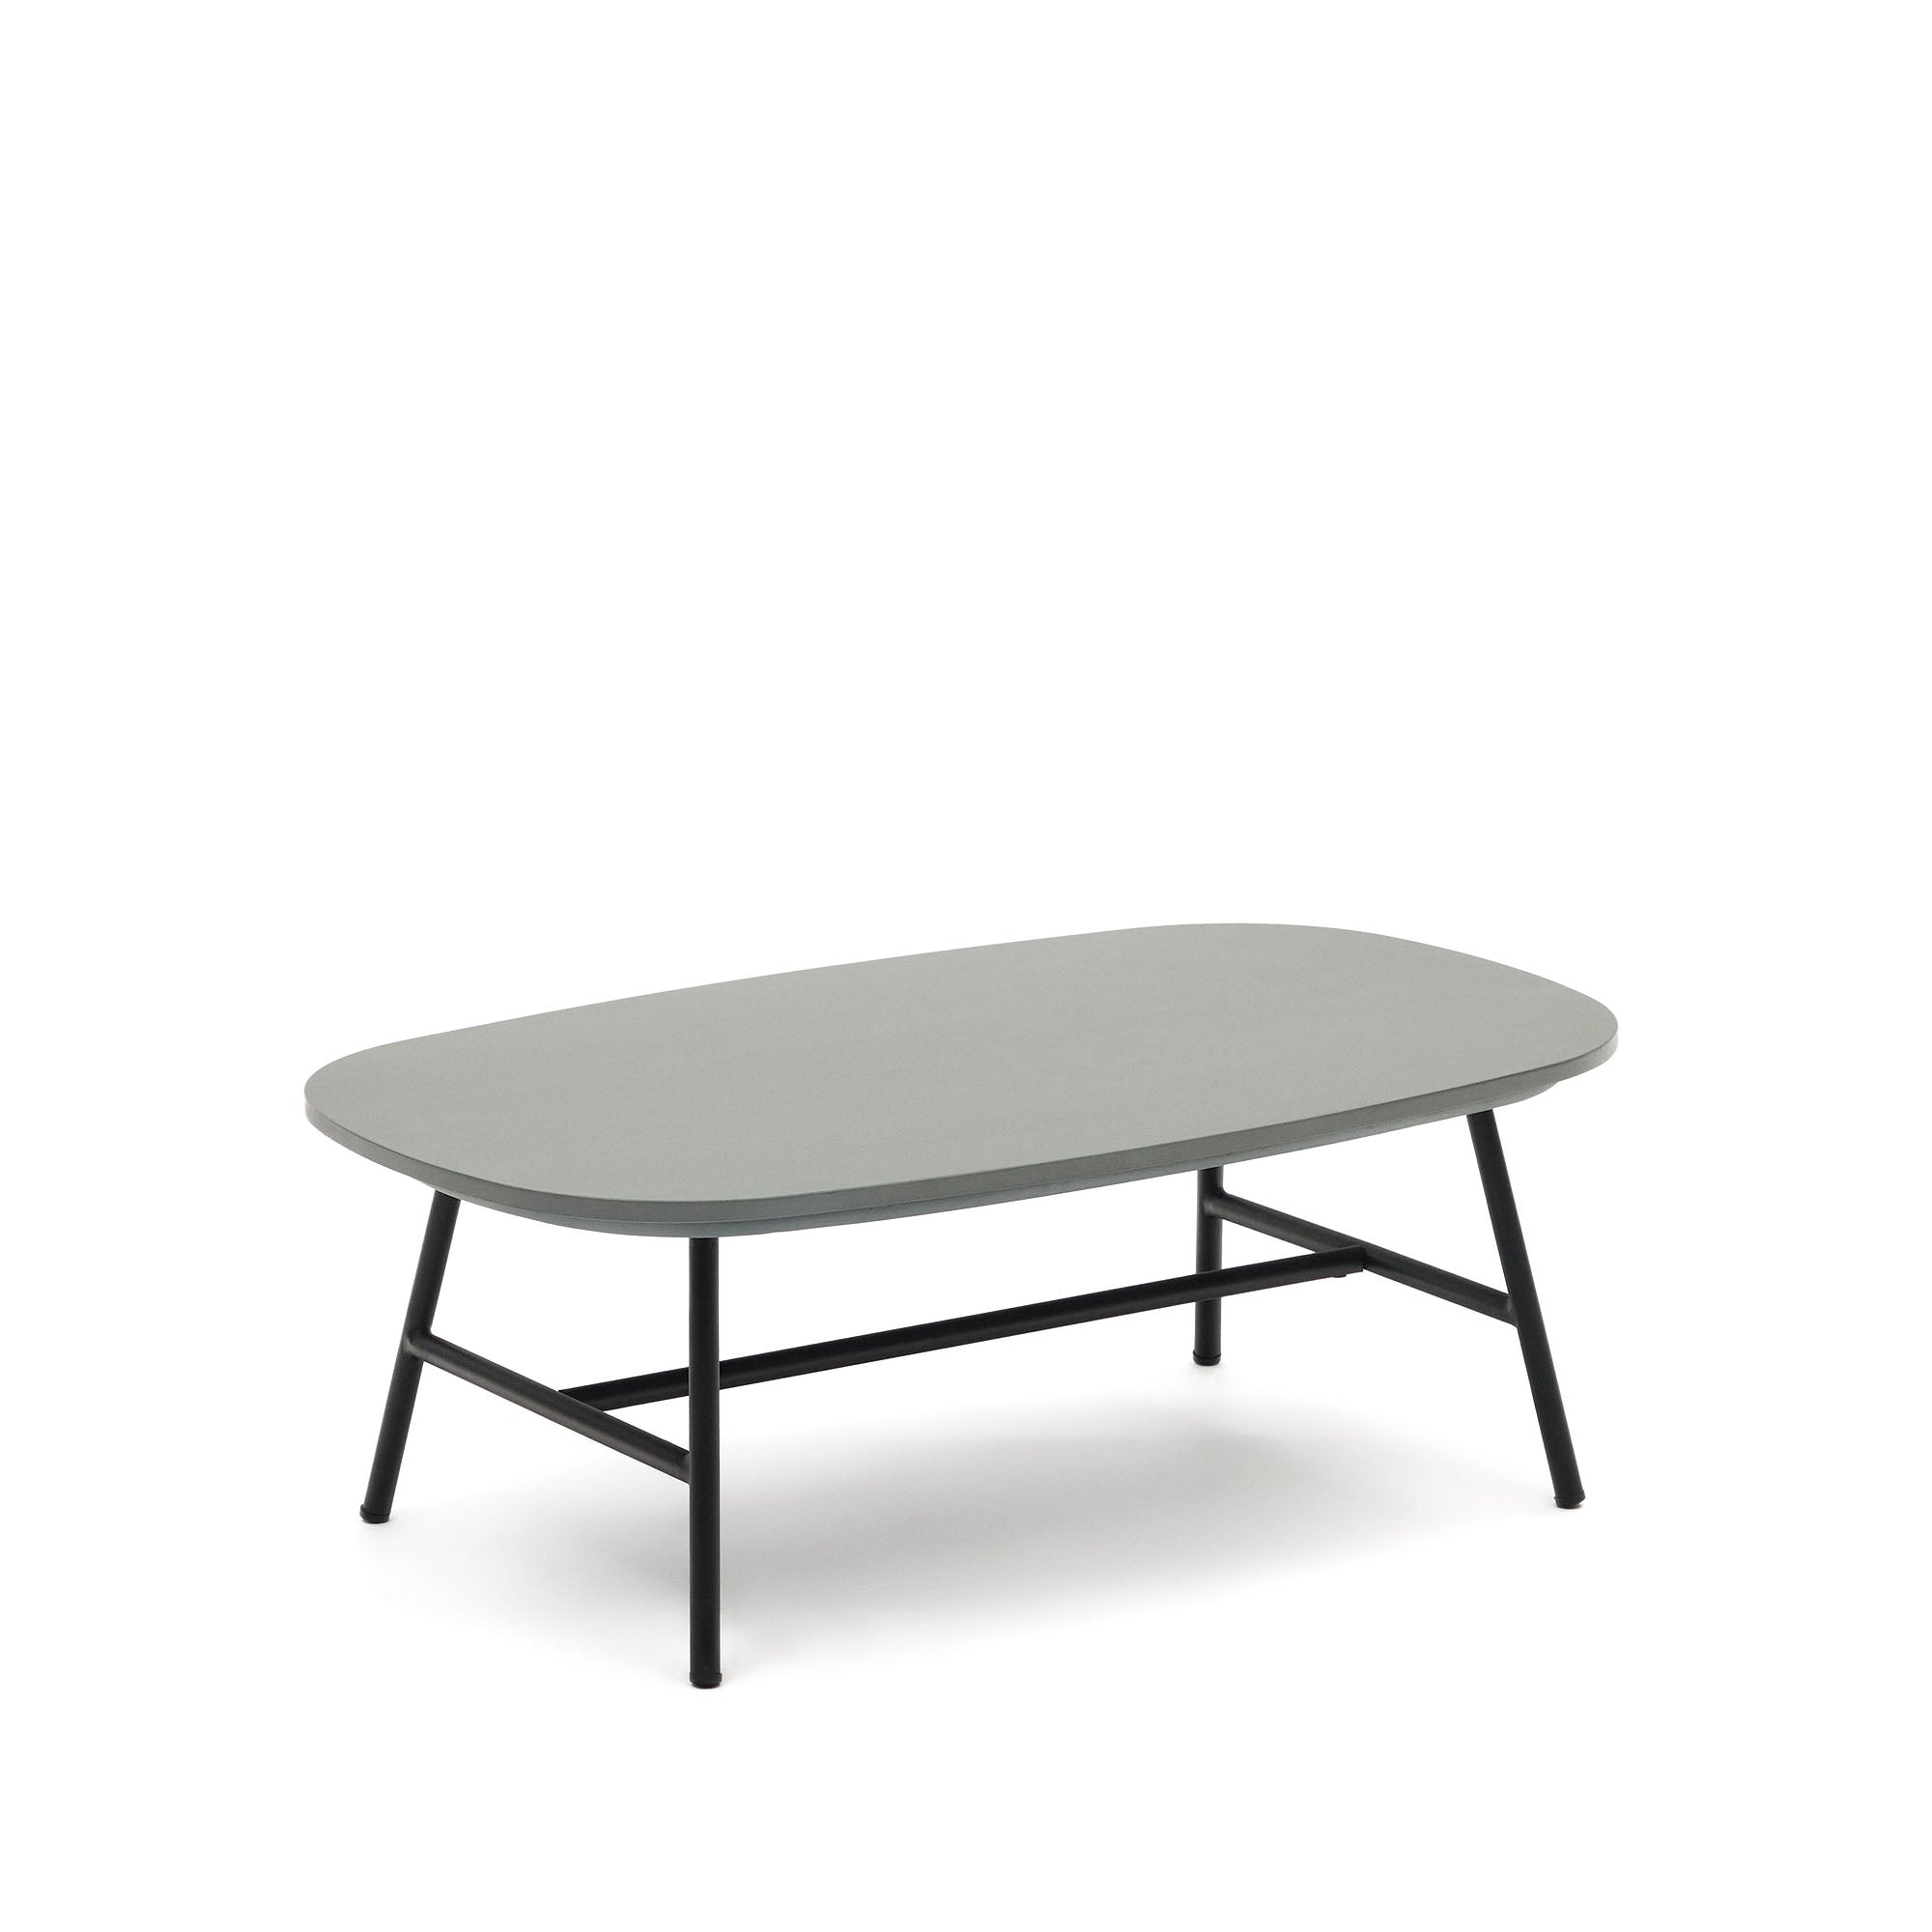 Bramant steel coffee table with black finish, 100 x 60 cm